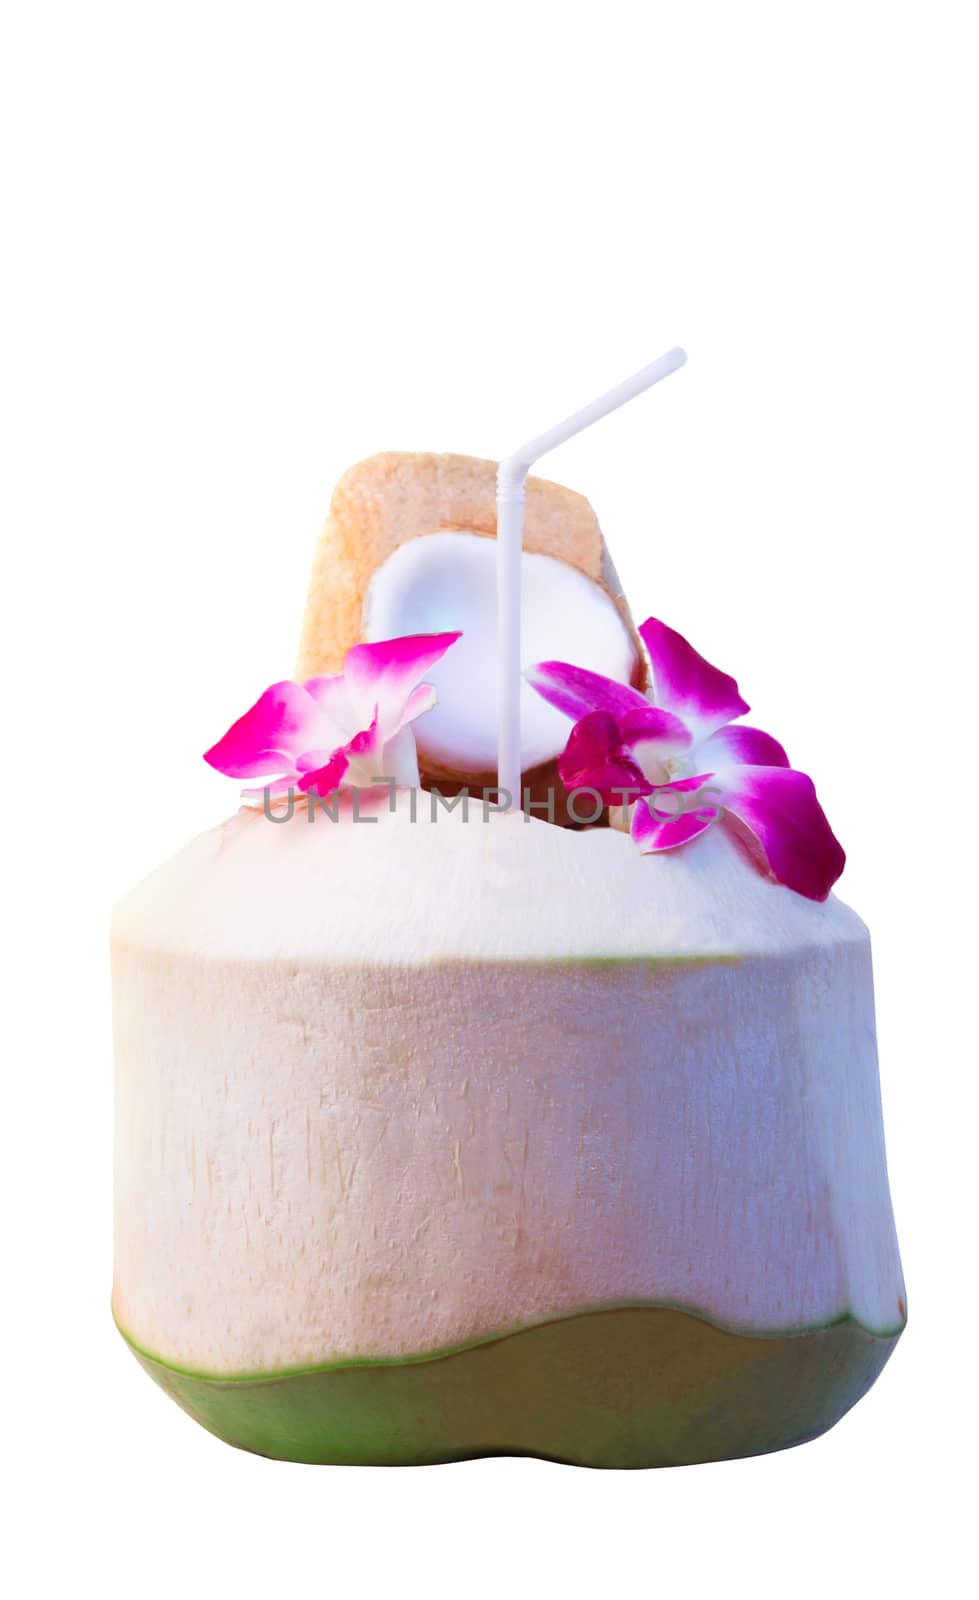 tropical fruit green coconut with beautiful purple orchid flowers petal use for welcome drink in tropical destination place isolated white background